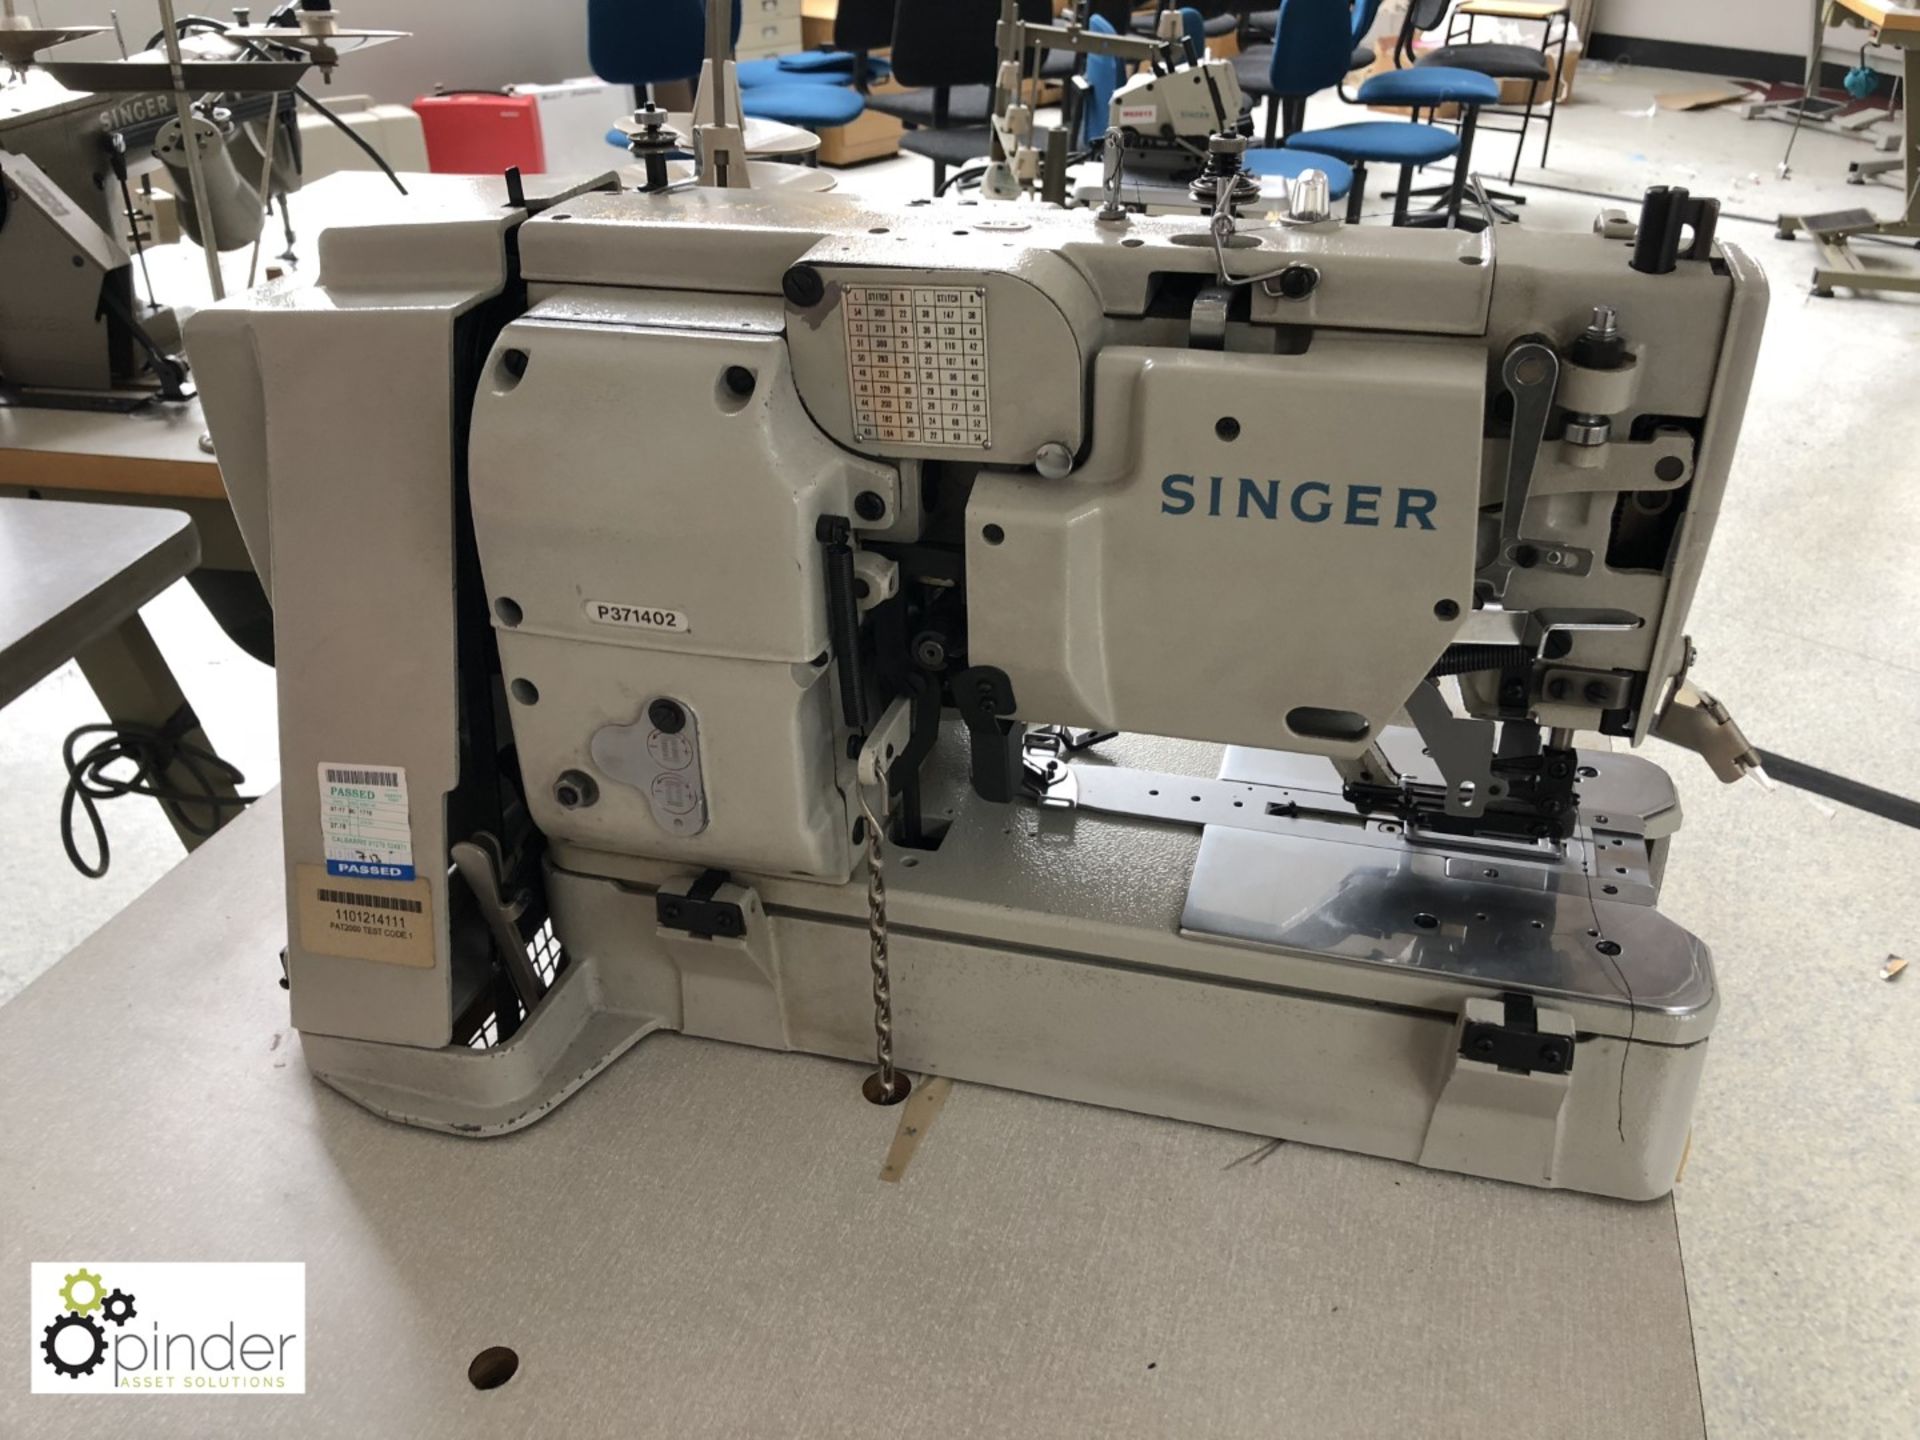 Singer 371 Buttonhole Sewing Machine, 240volts (located in W610, level 6)